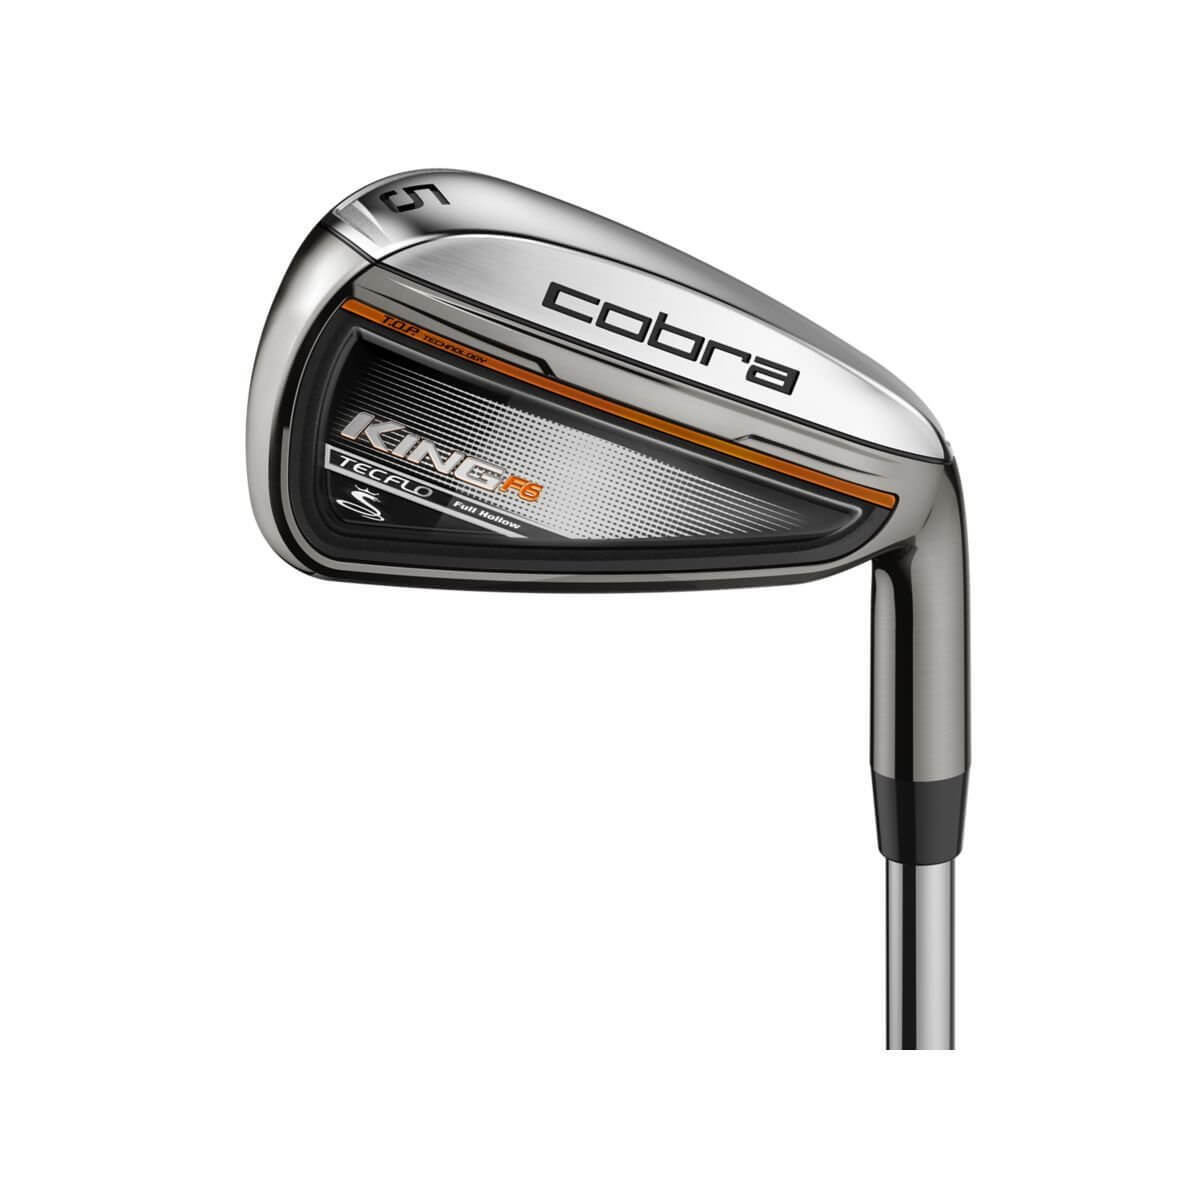 Cobra King F6 Irons Review